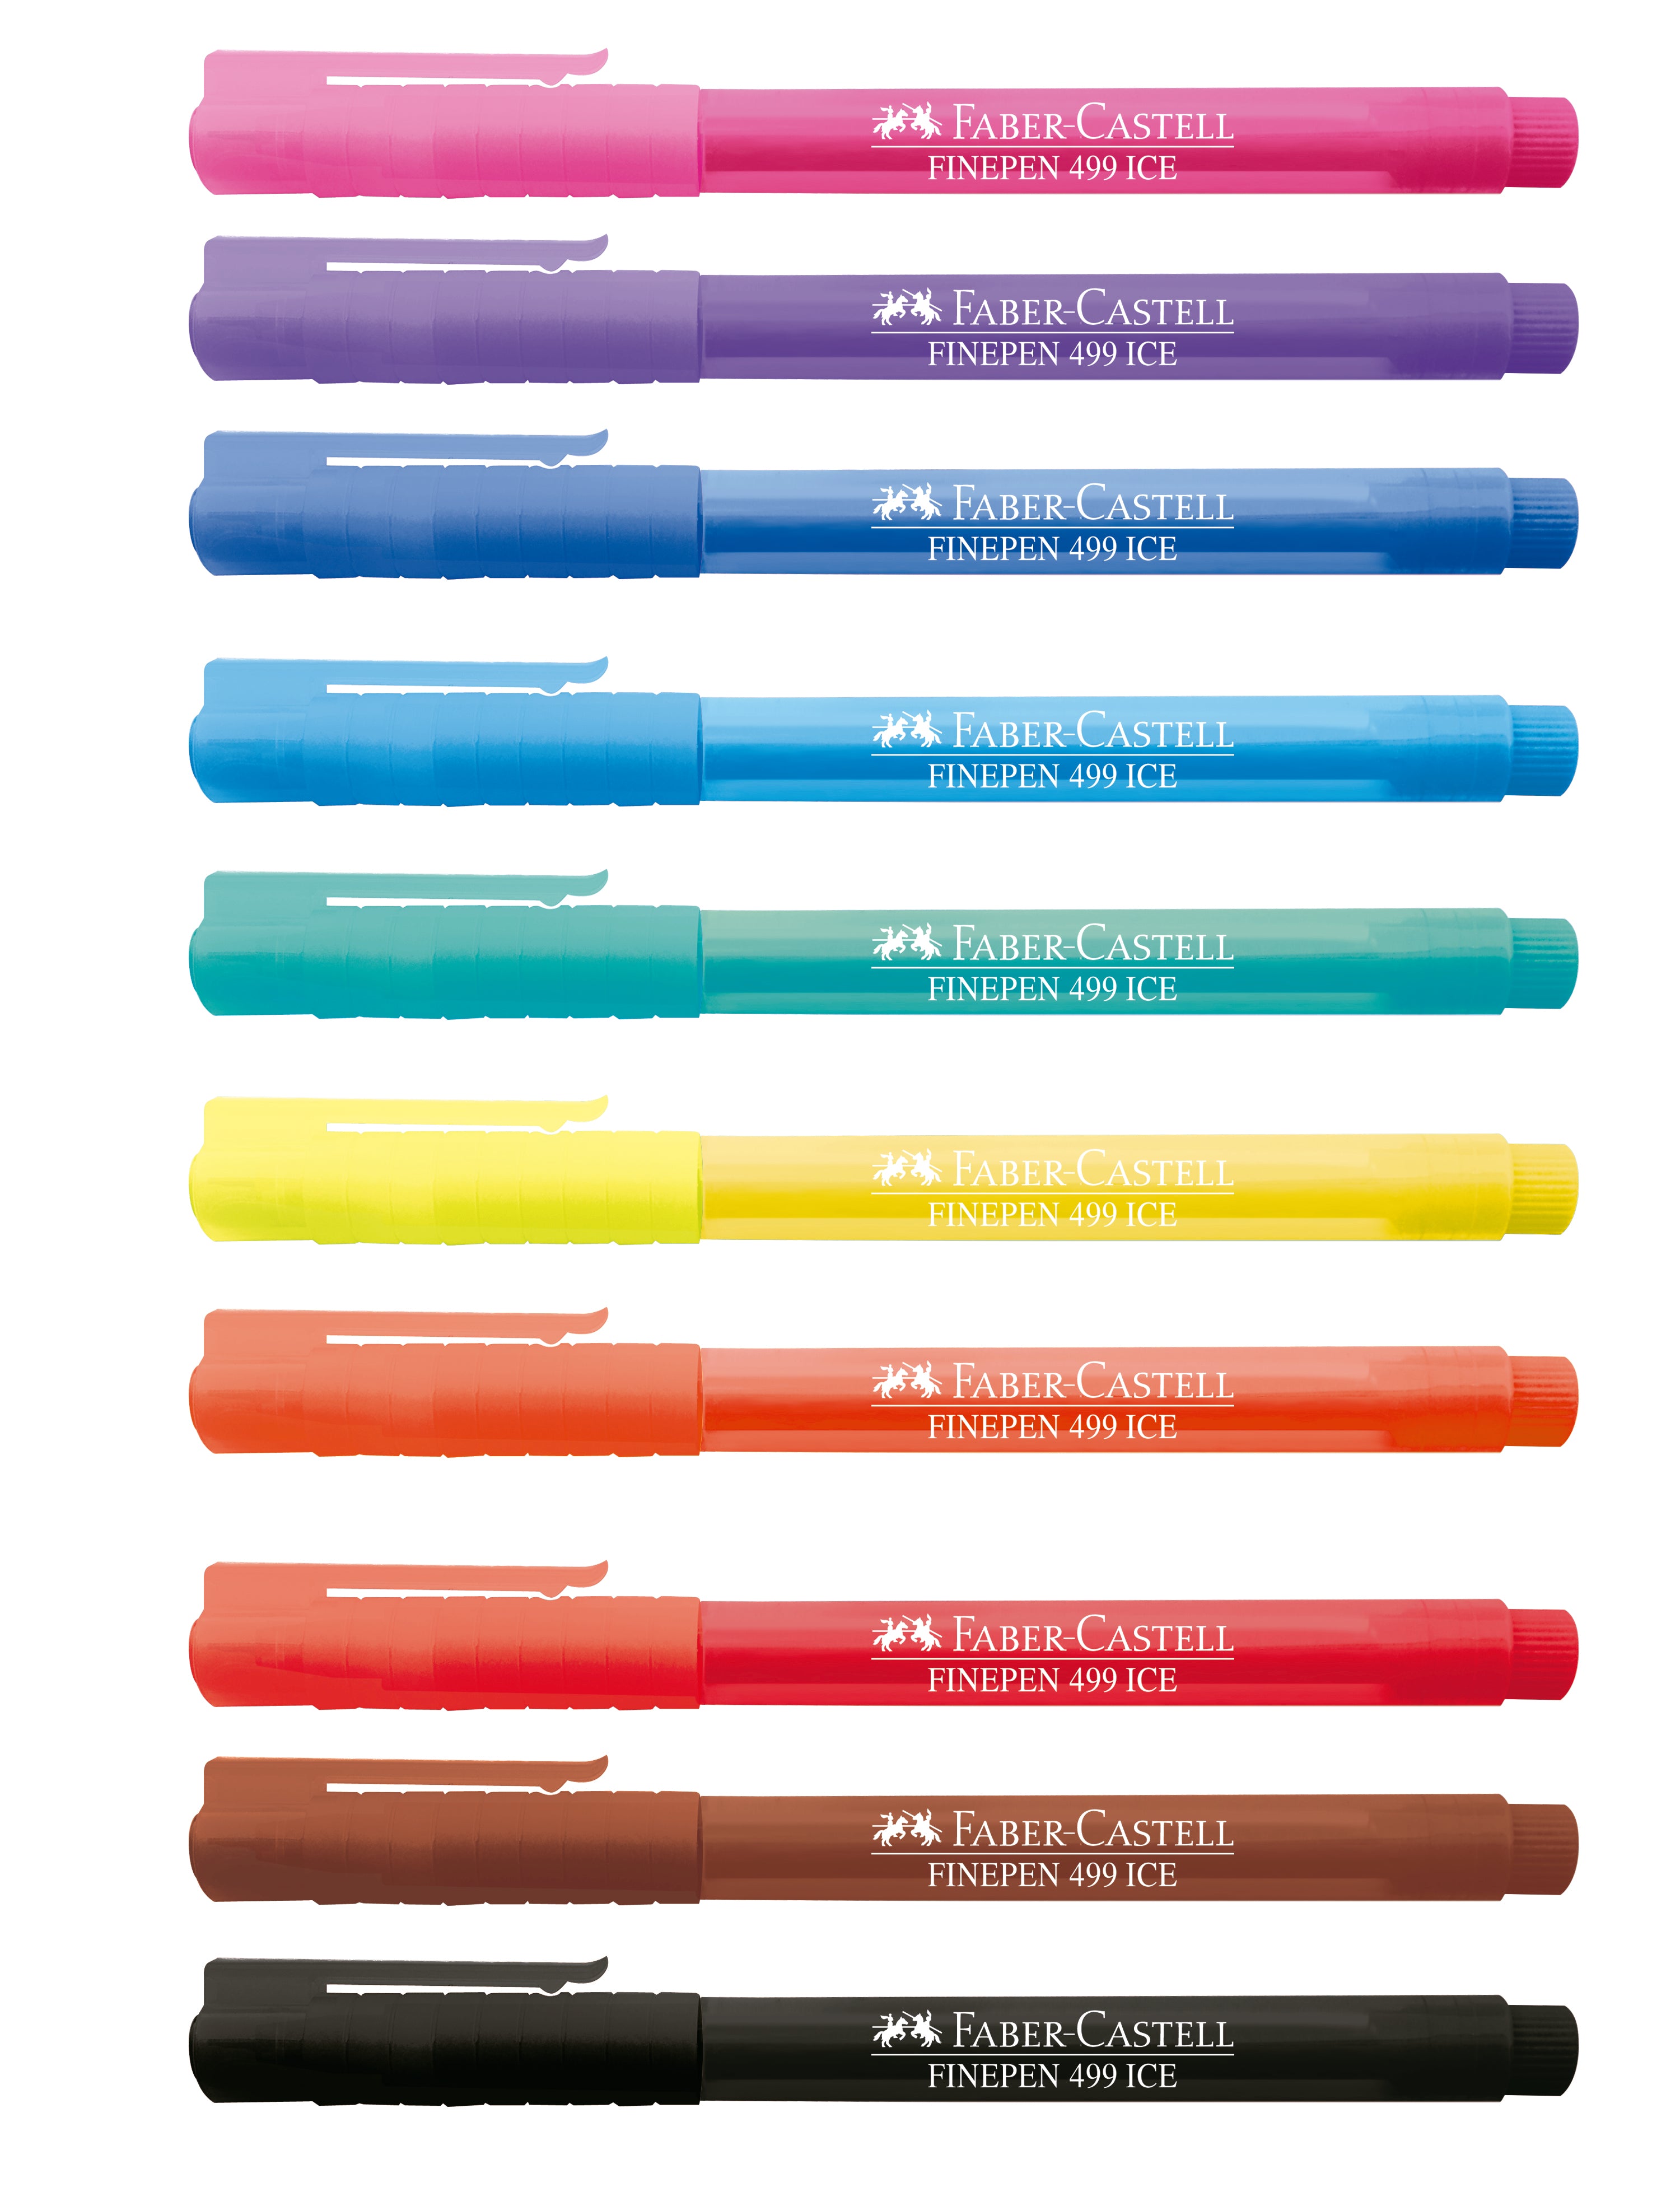 Rotuladores Faber Castell Punta Fina Ice 10 Pz - MarchanteMX